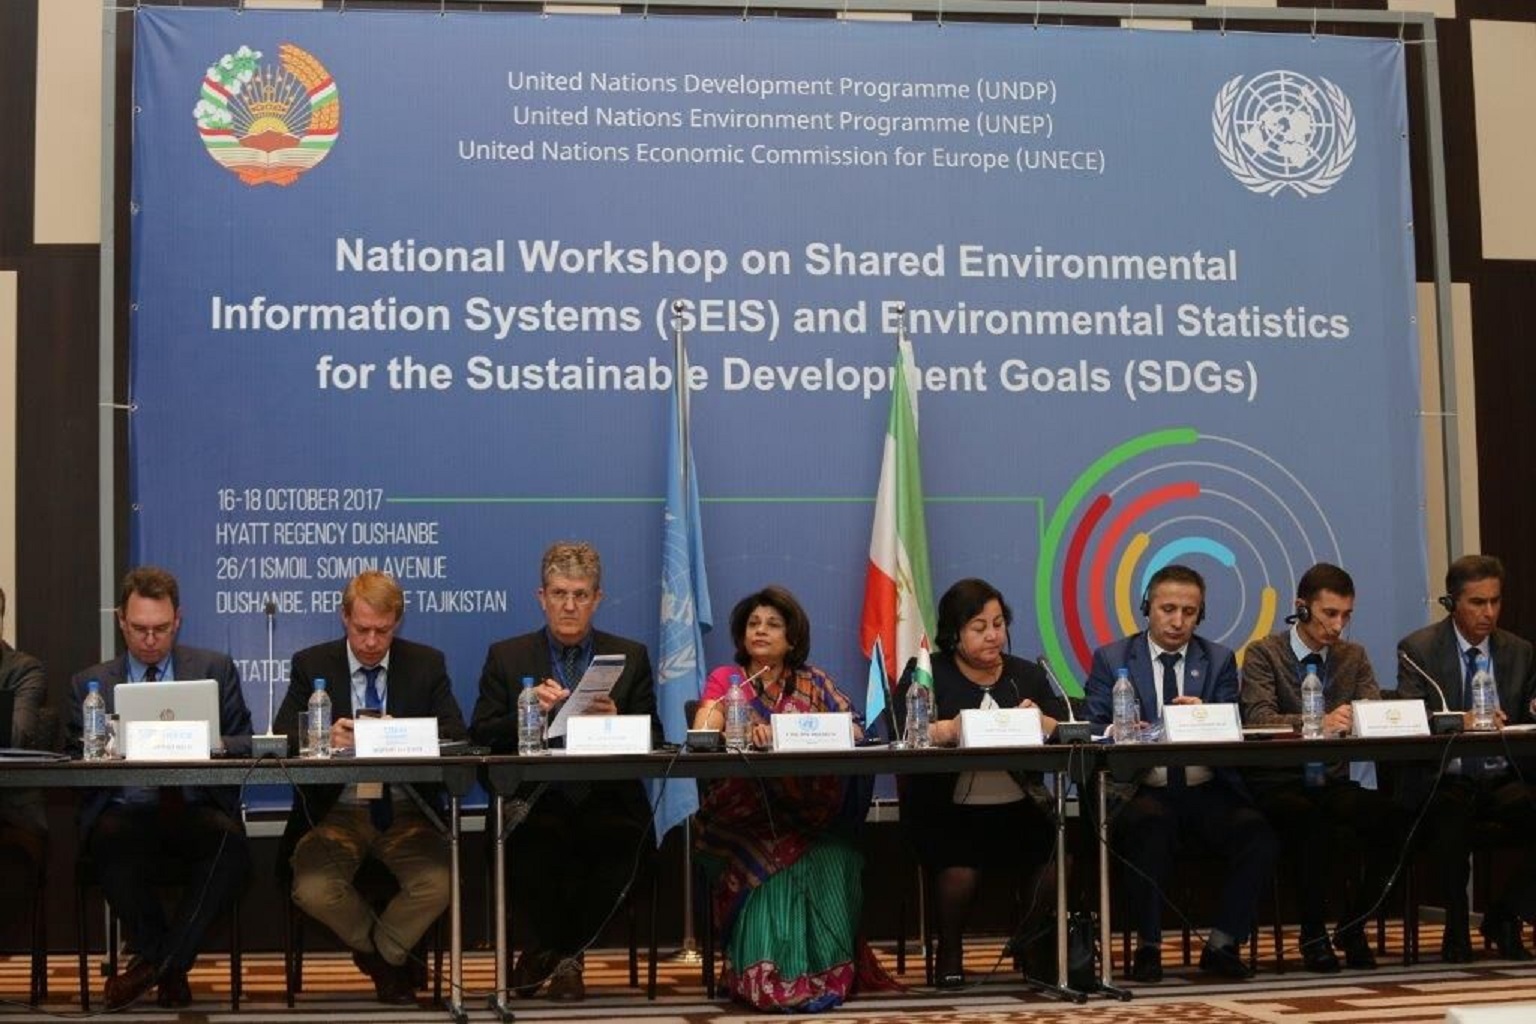 National Workshop on Shared Environmental Information Systems (SEIS) and Environmental Statistics for the Sustainable Development Goals (SDGs) in Tajikistan